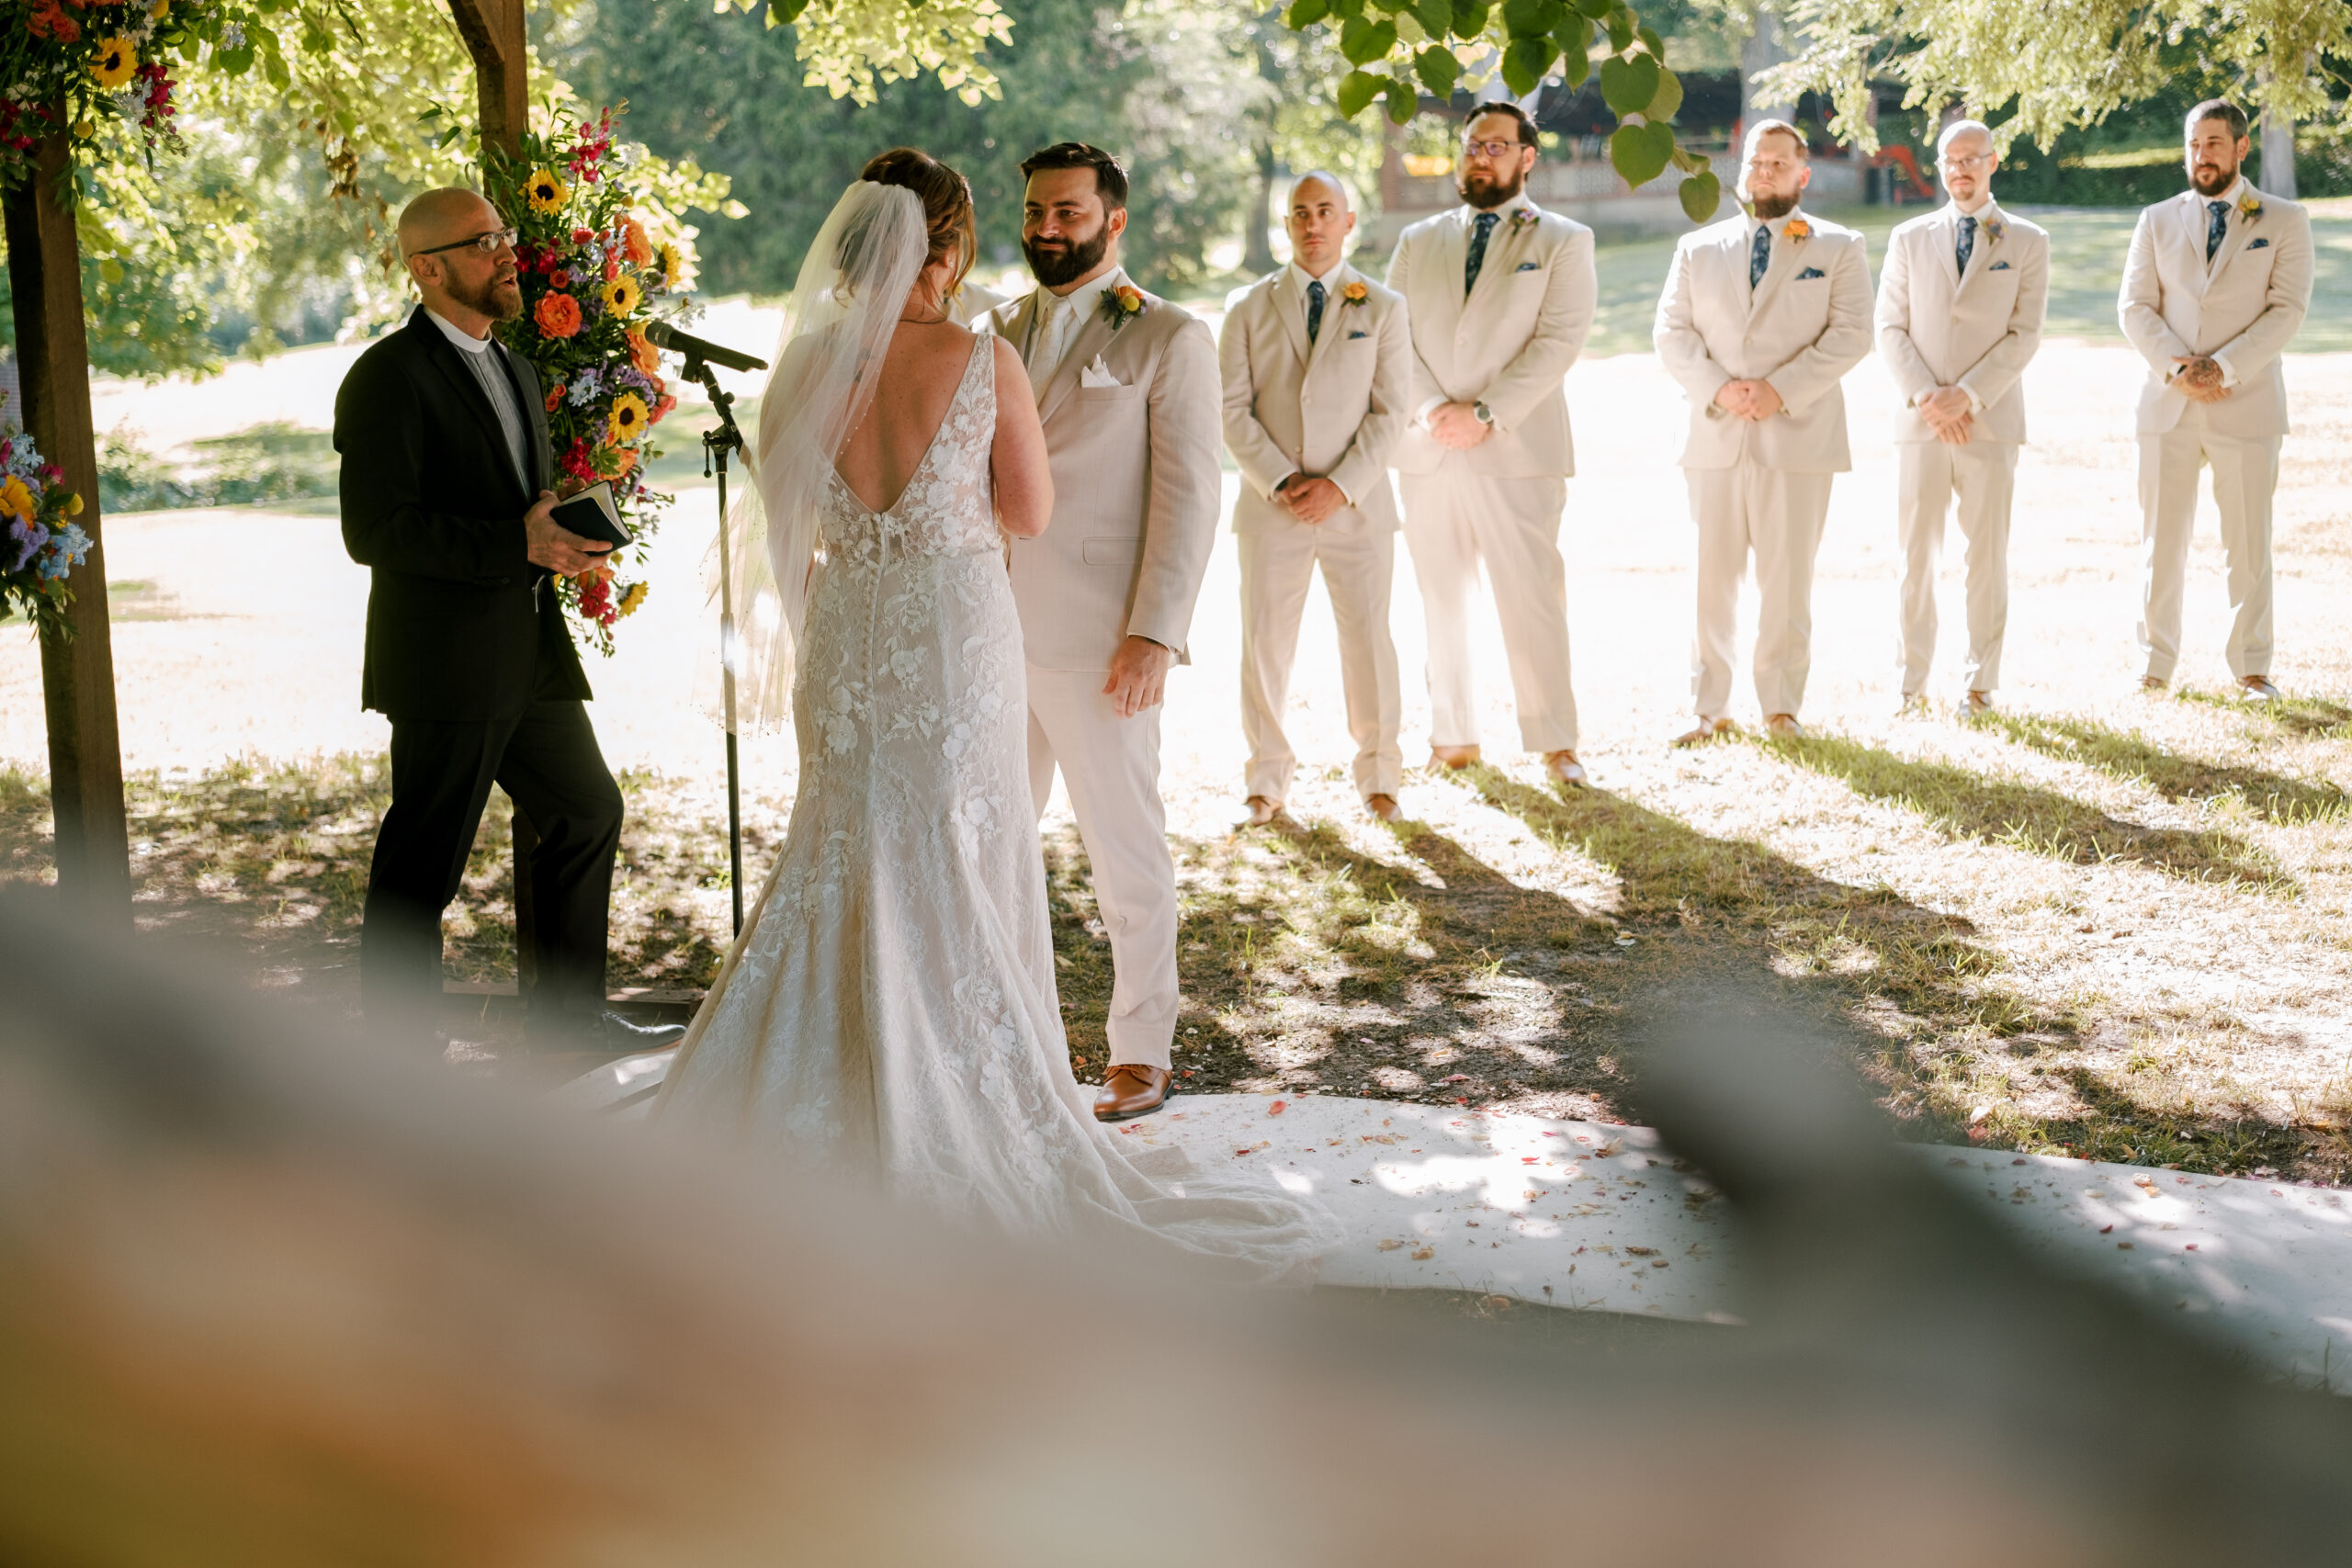 A couple gets married under a tree in a rustic outdoor wedding.